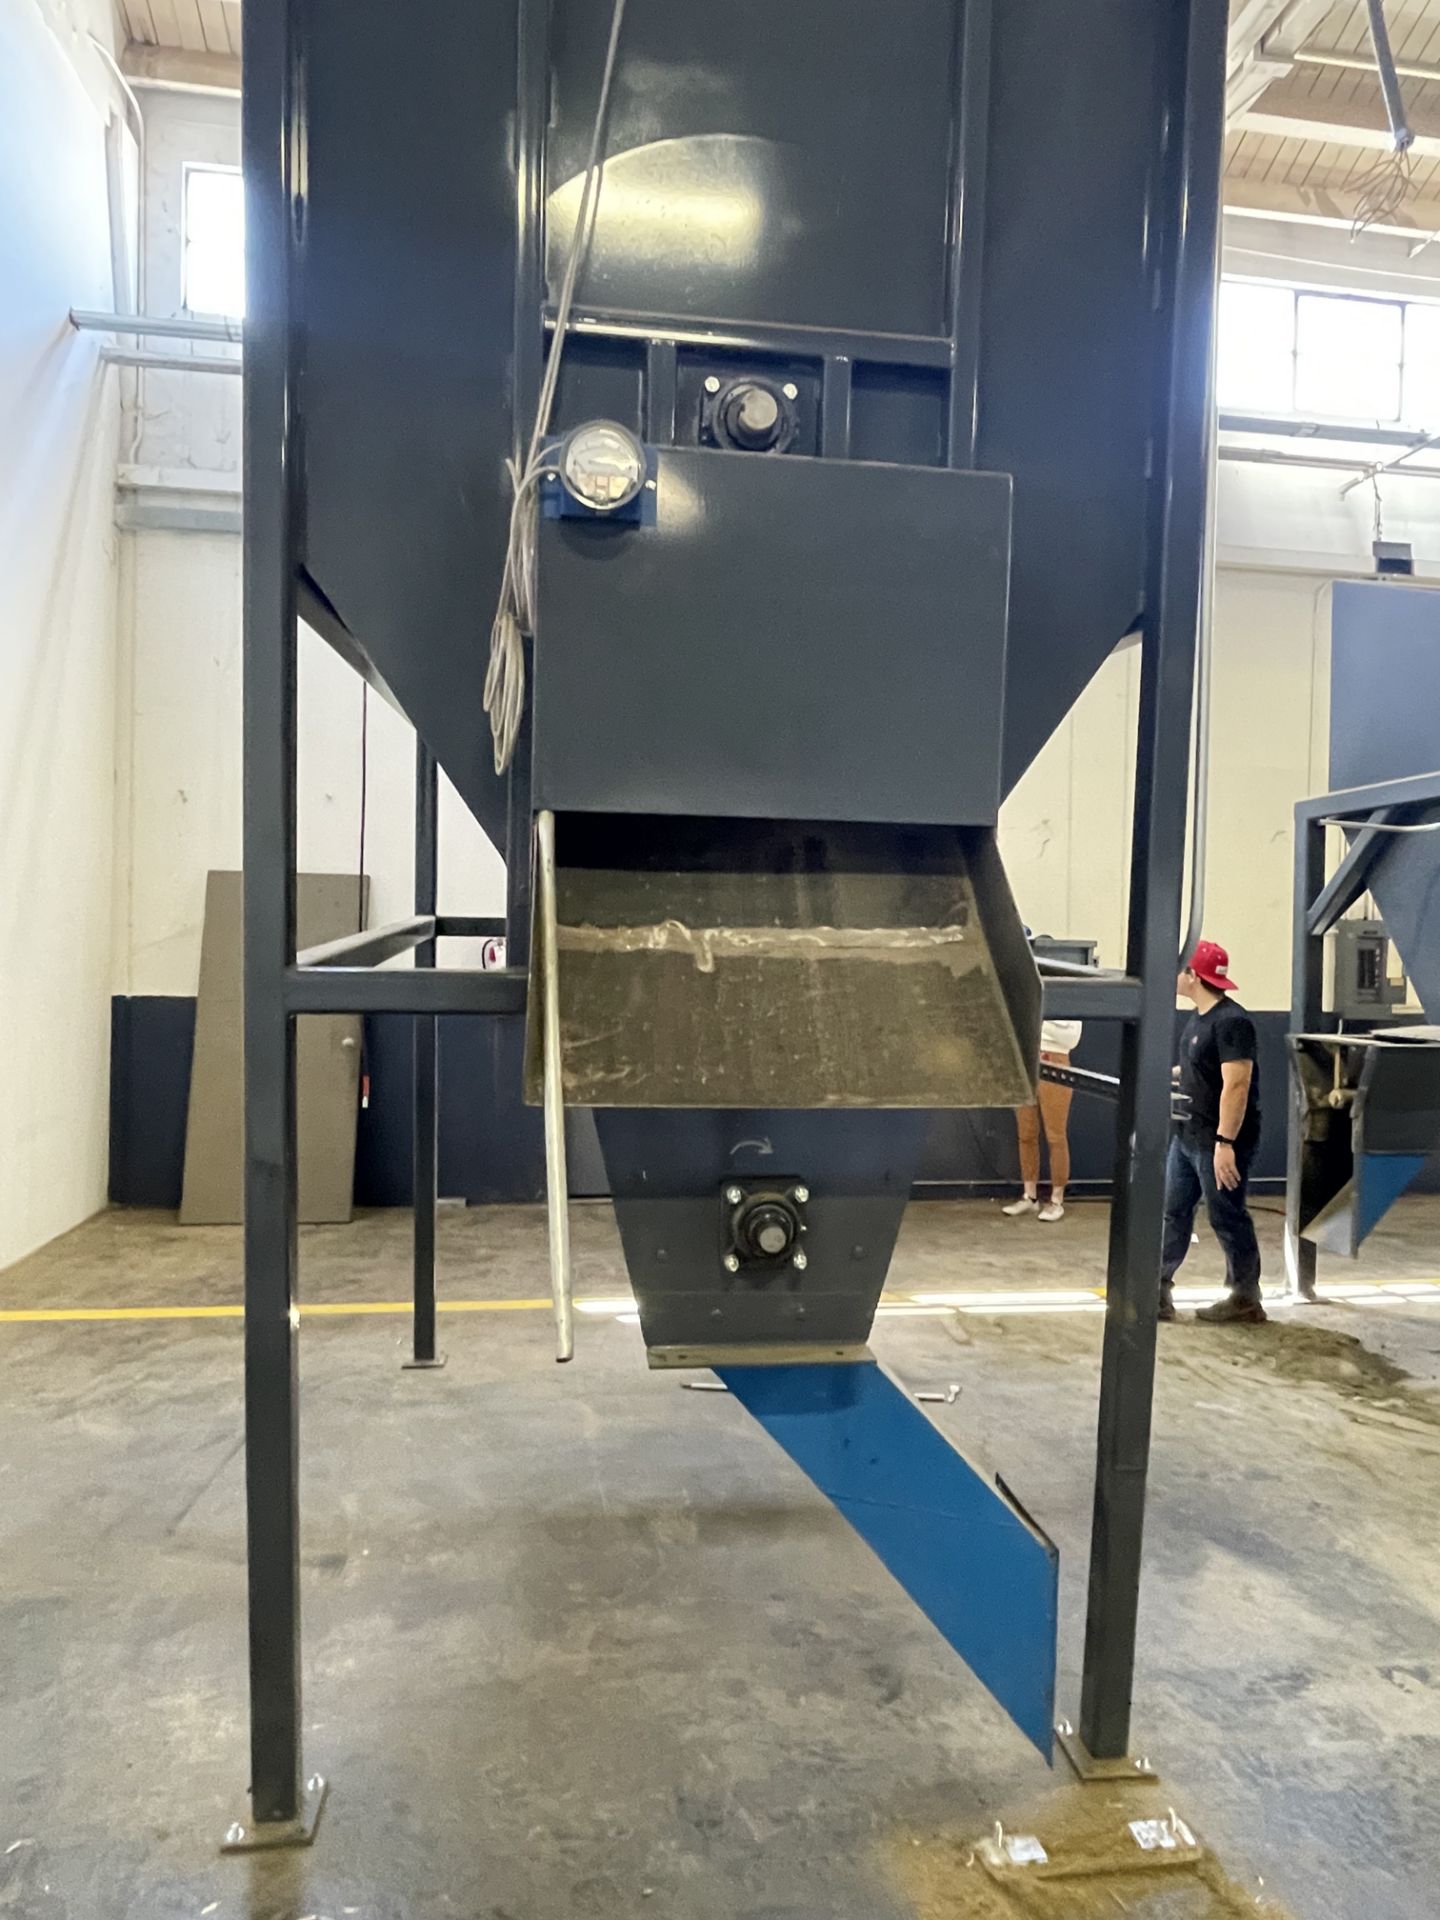 Used Custom Designed Biomass Polisher. Output: 500-600 Pounds per hour depending on material density - Image 4 of 41